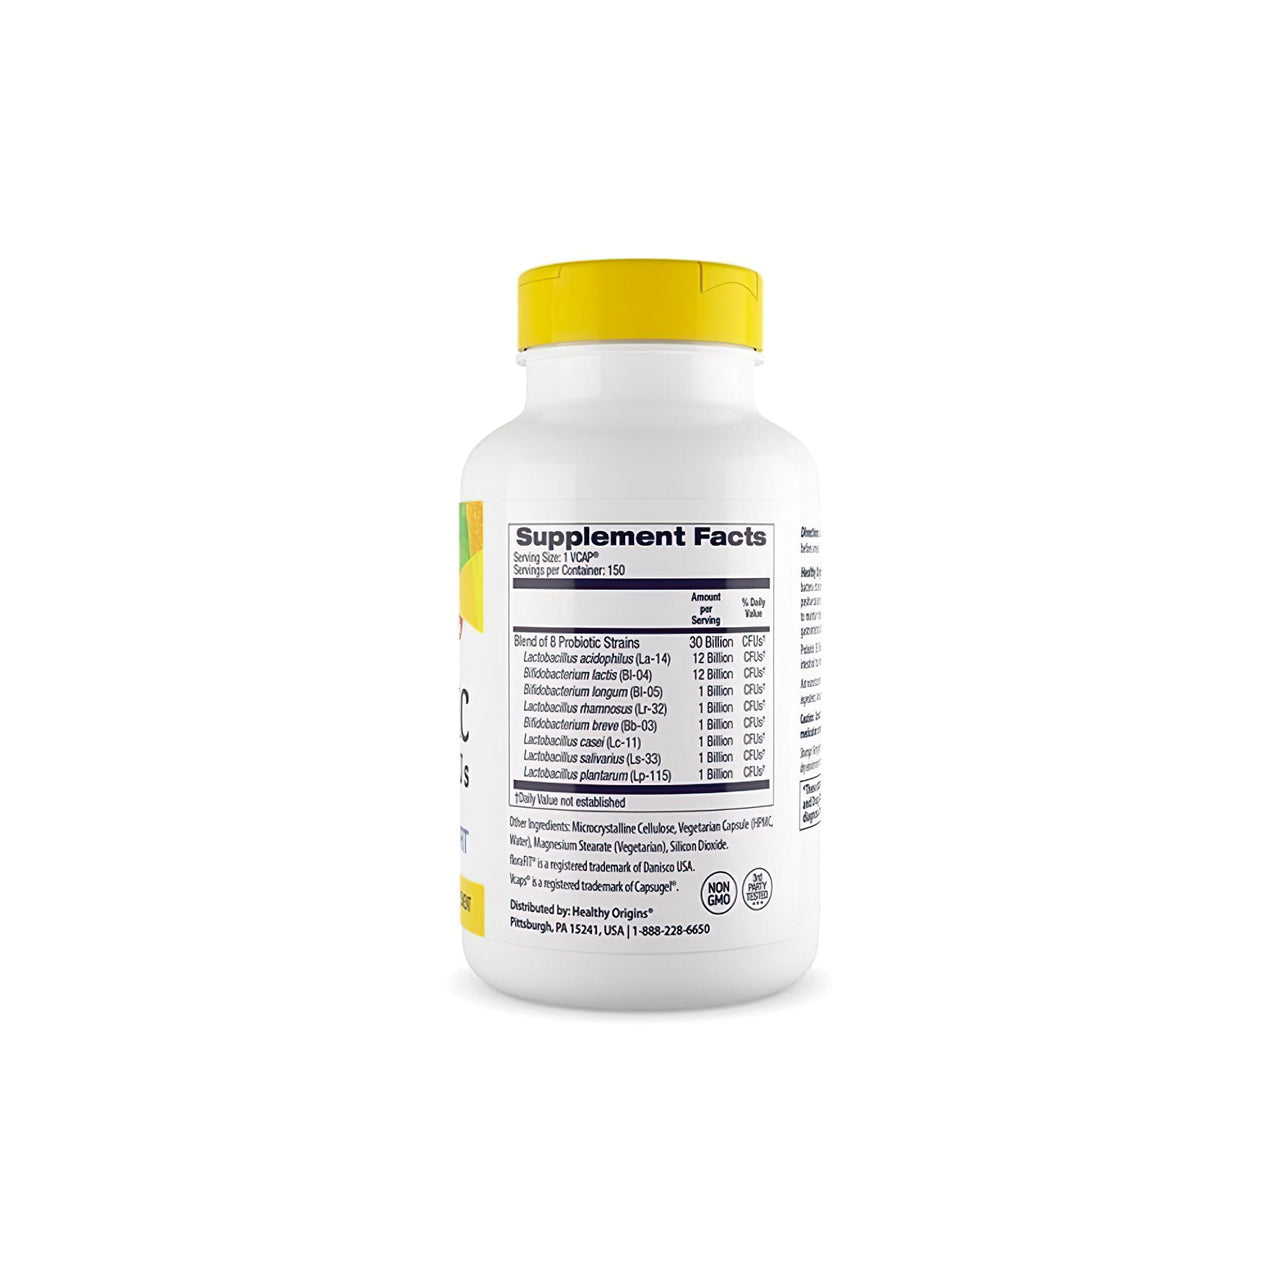 A bottle of Probiotic 30 Billion CFU 150 vege capsules, promoting a healthy immune system, placed against a clean white background. (Brand: Healthy Origins)